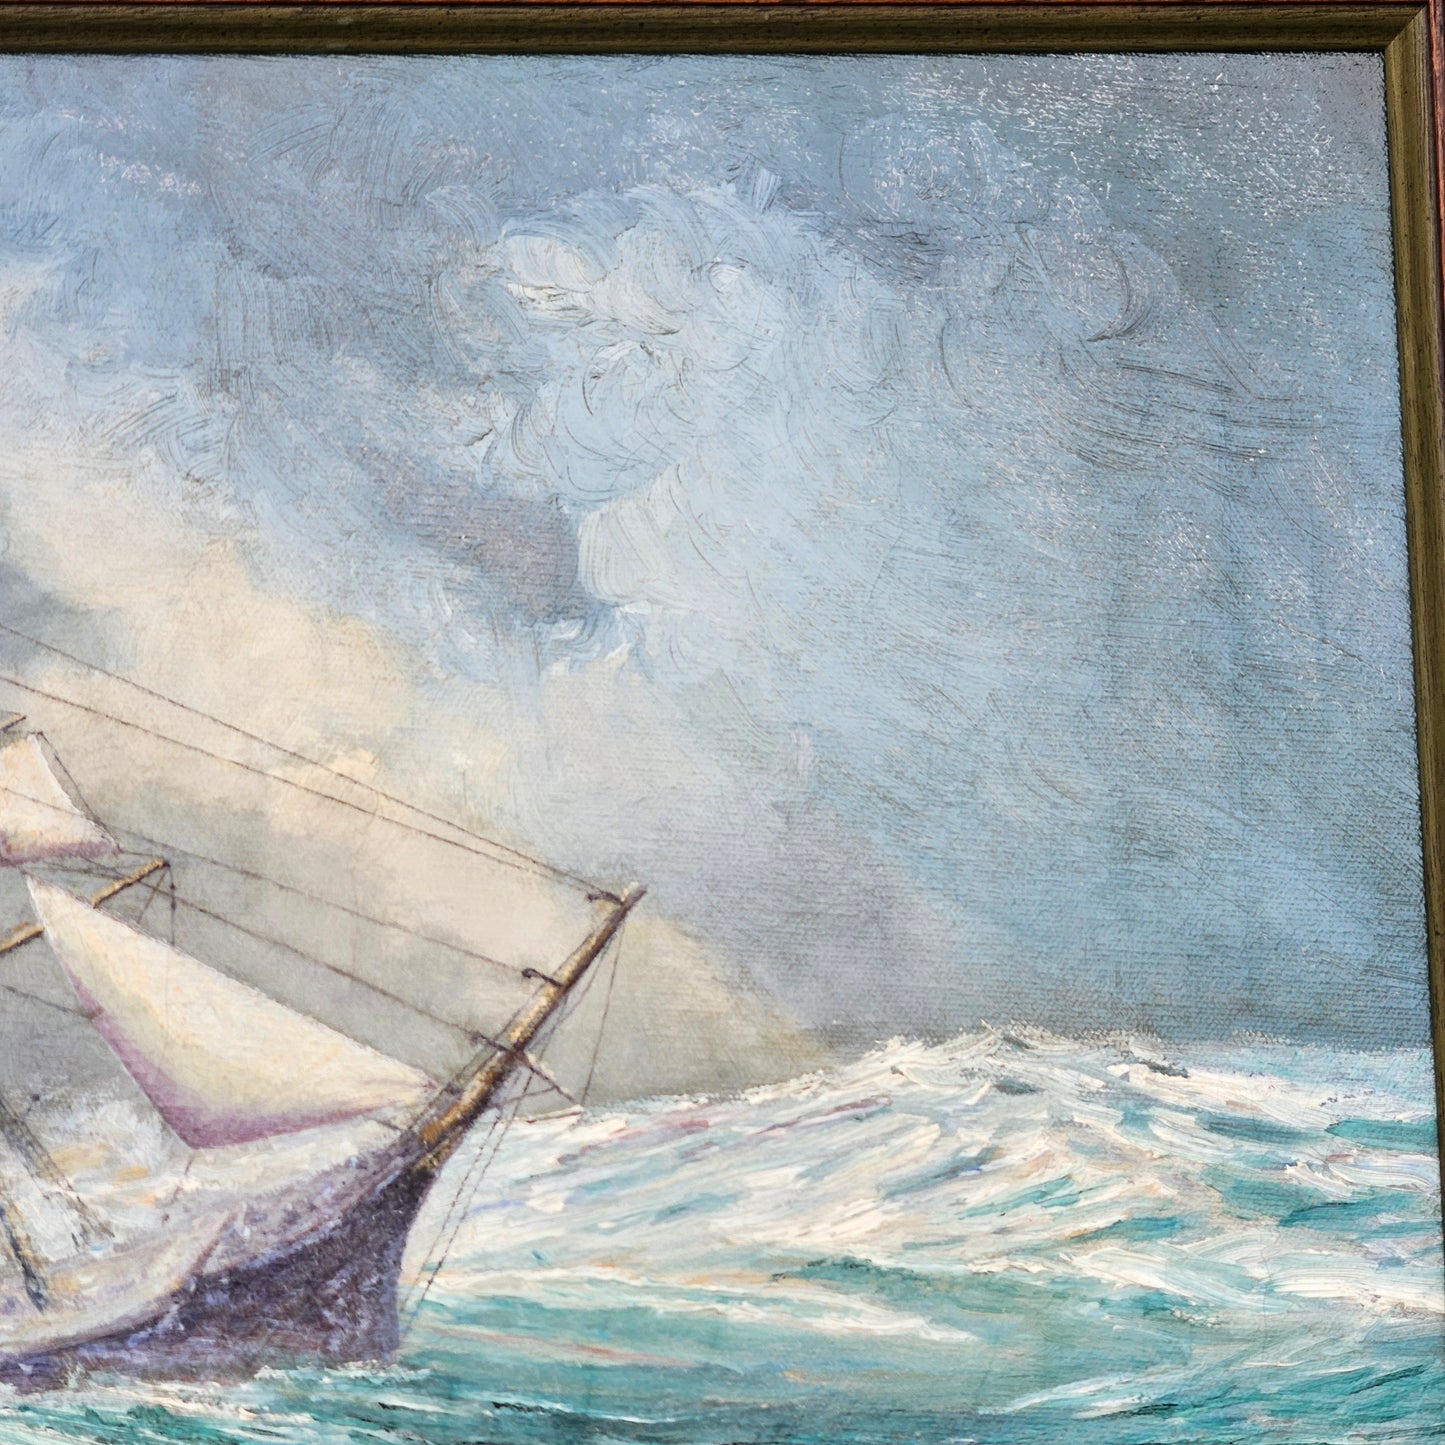 Vintage Signed Oil on Canvas Painting of Ship in Rough Seas - James McGarrigle